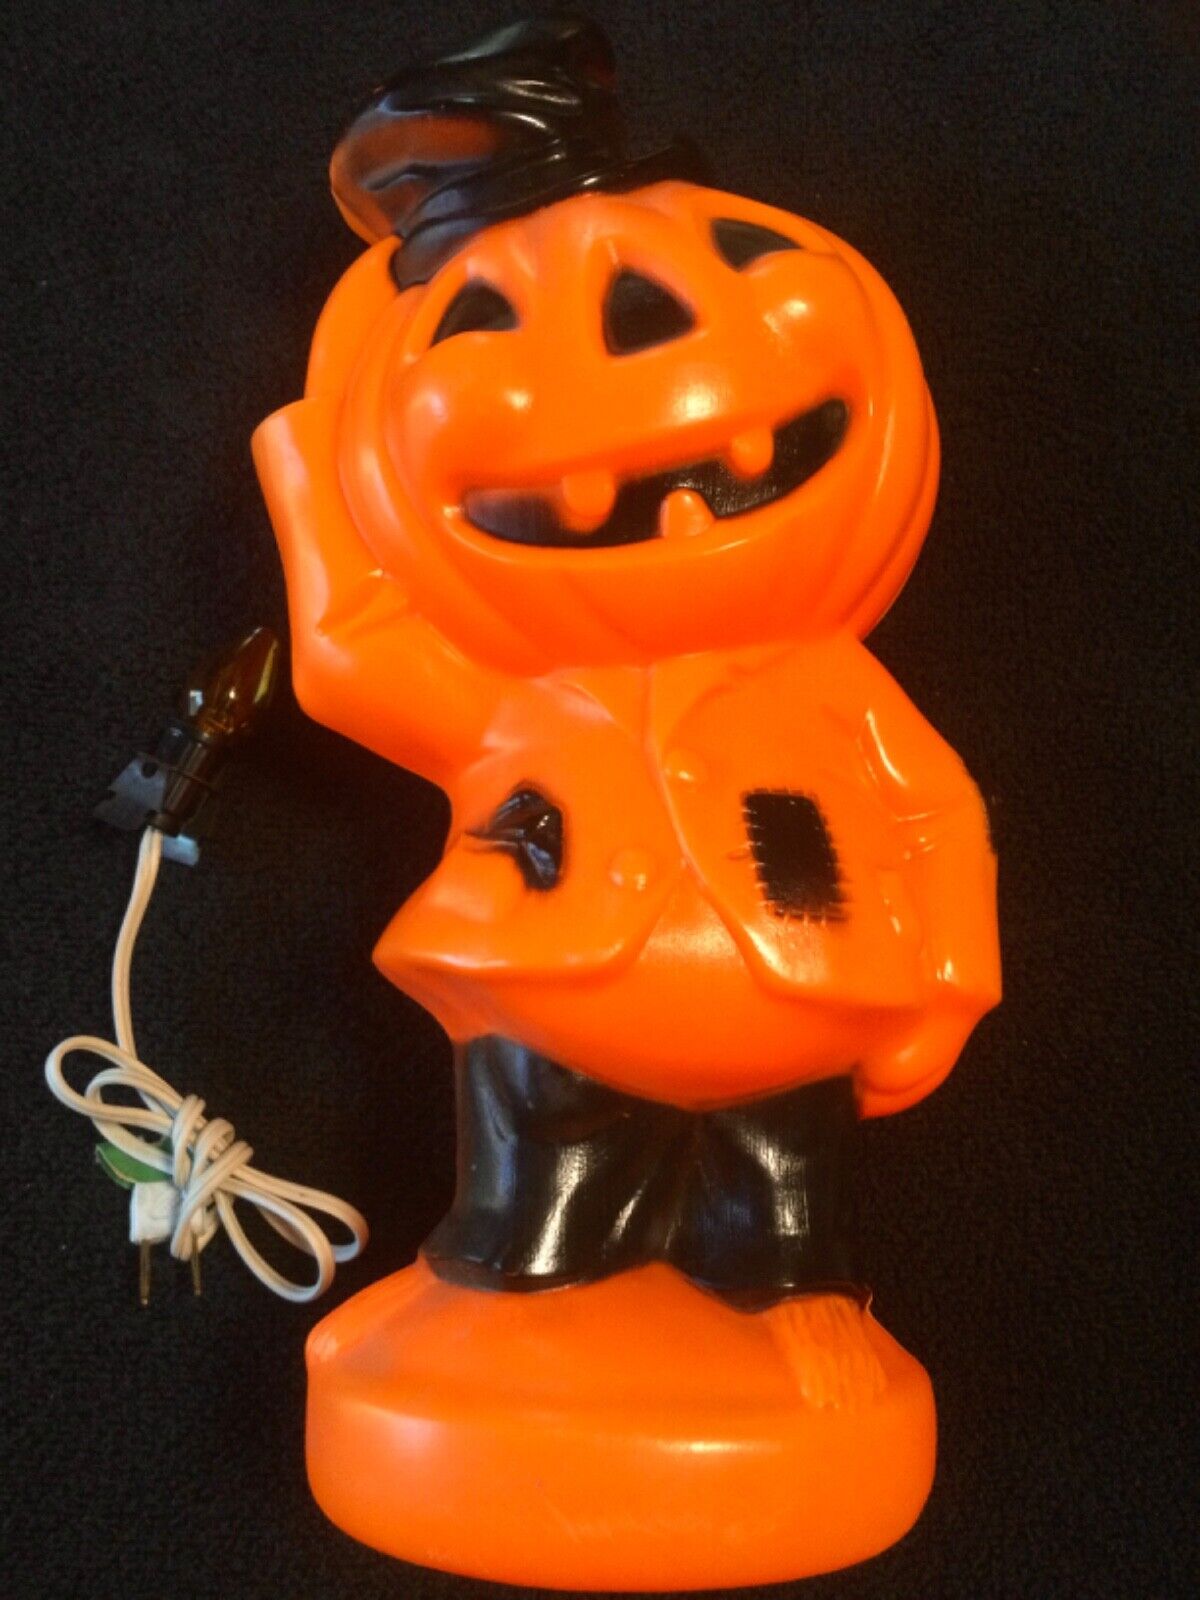 Vintage 1969 EMPIRE Halloween JOL PUMPKIN SCARECROW BLOW MOLD 15” tall with cord